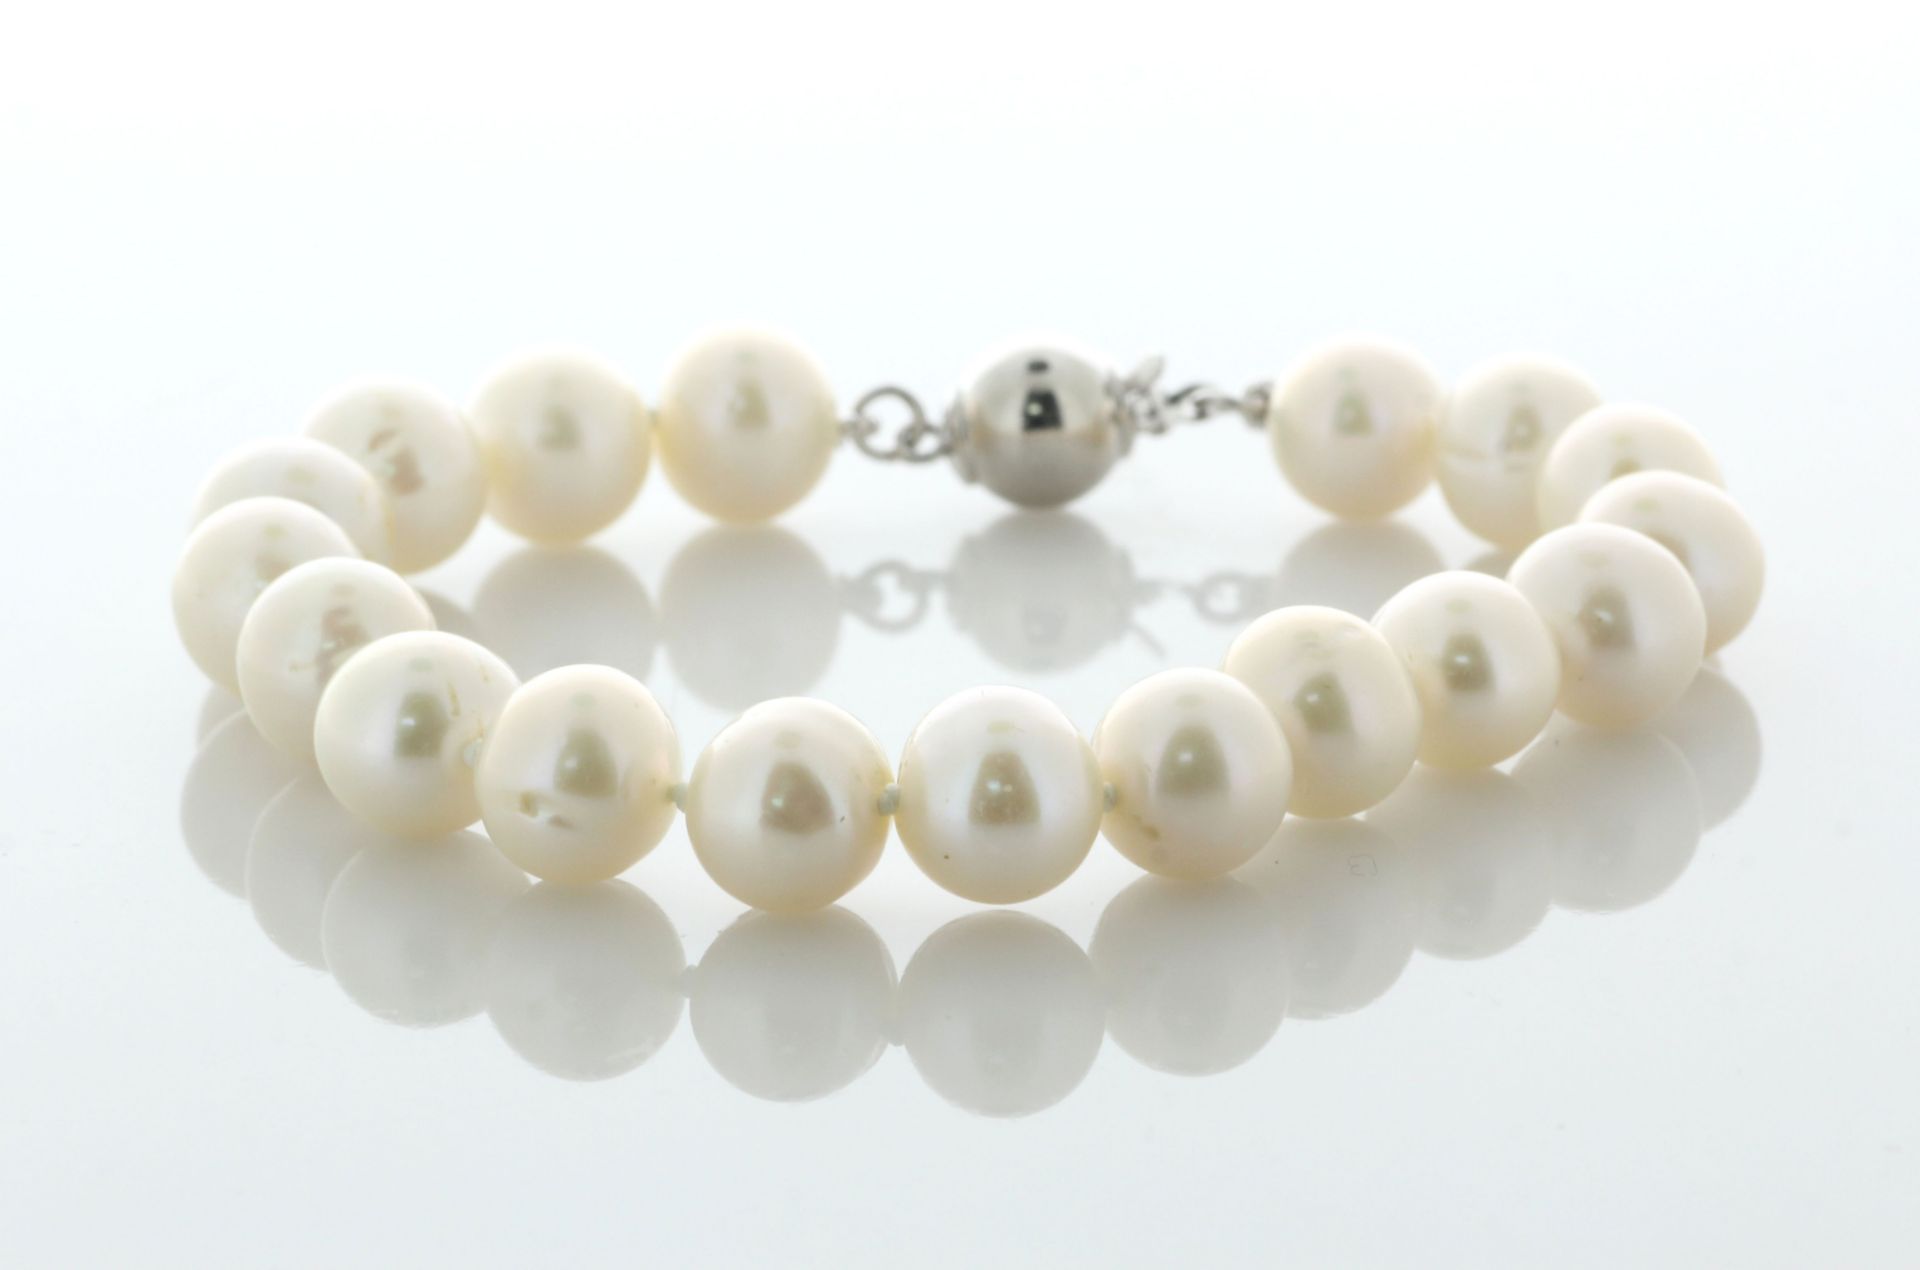 6.5 Inches Freshwater Cultured 8.5 - 9.0mm Pearl Bracelet With Silver Clasp - Valued By AGI £285.